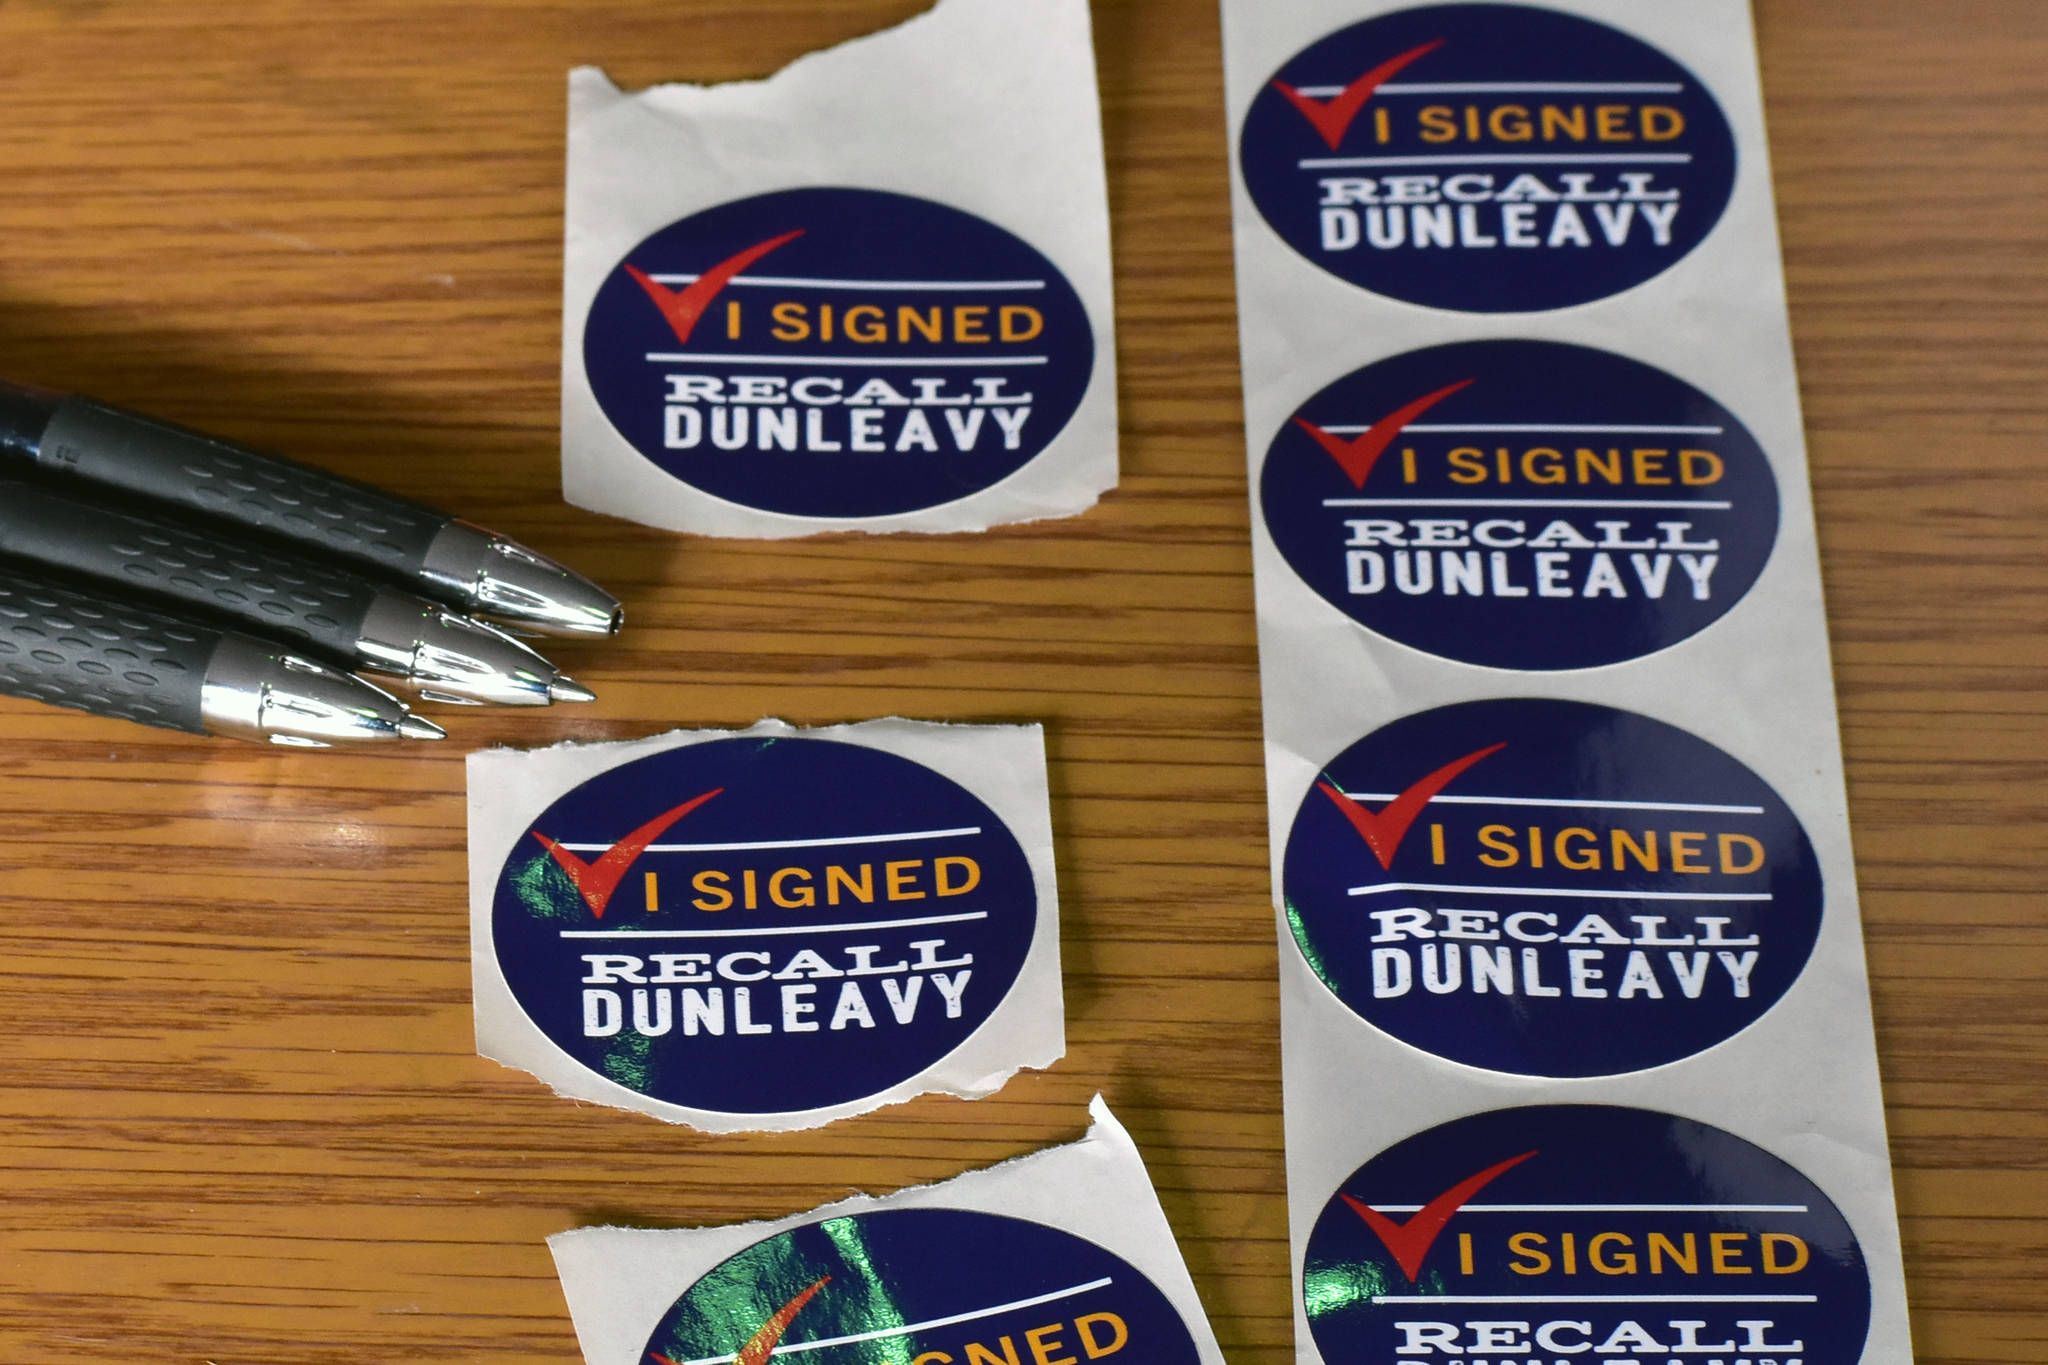 Juneauites gathered signatures to recall Gov. Mike Dunleavy in late February. Friday, the Alaska Supreme Court ruled the recall effort could proceed. (Peter Segall | Juneau Empire File)